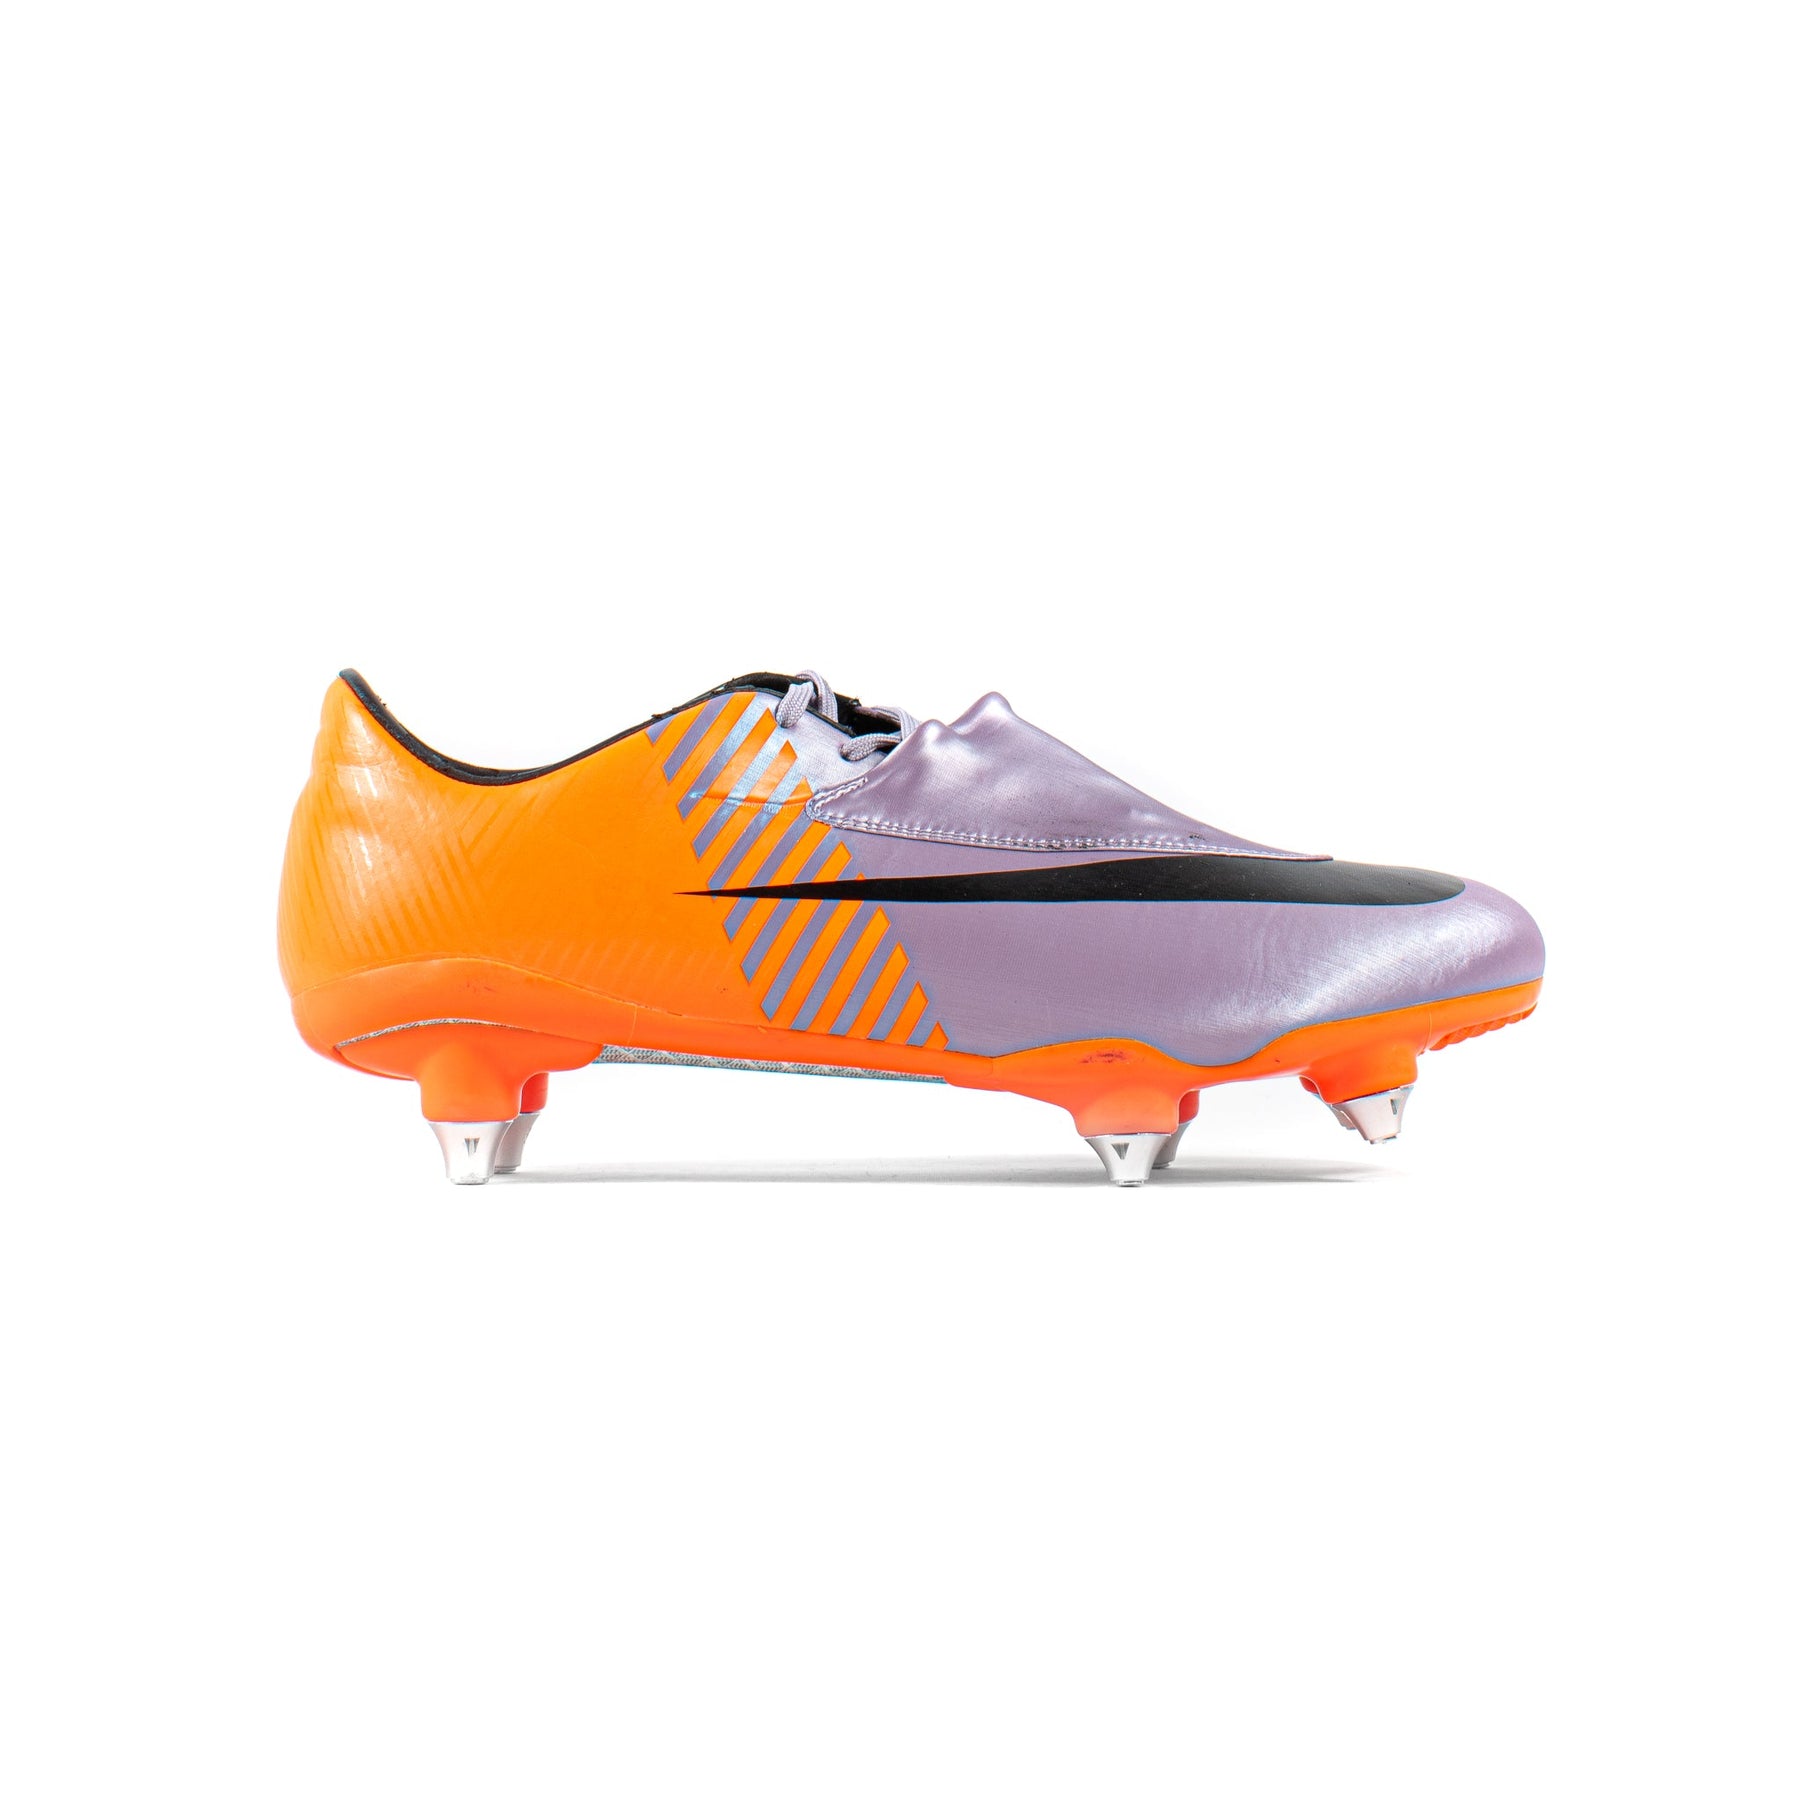 Mercurial VI World Cup SG – Classic Soccer Cleats